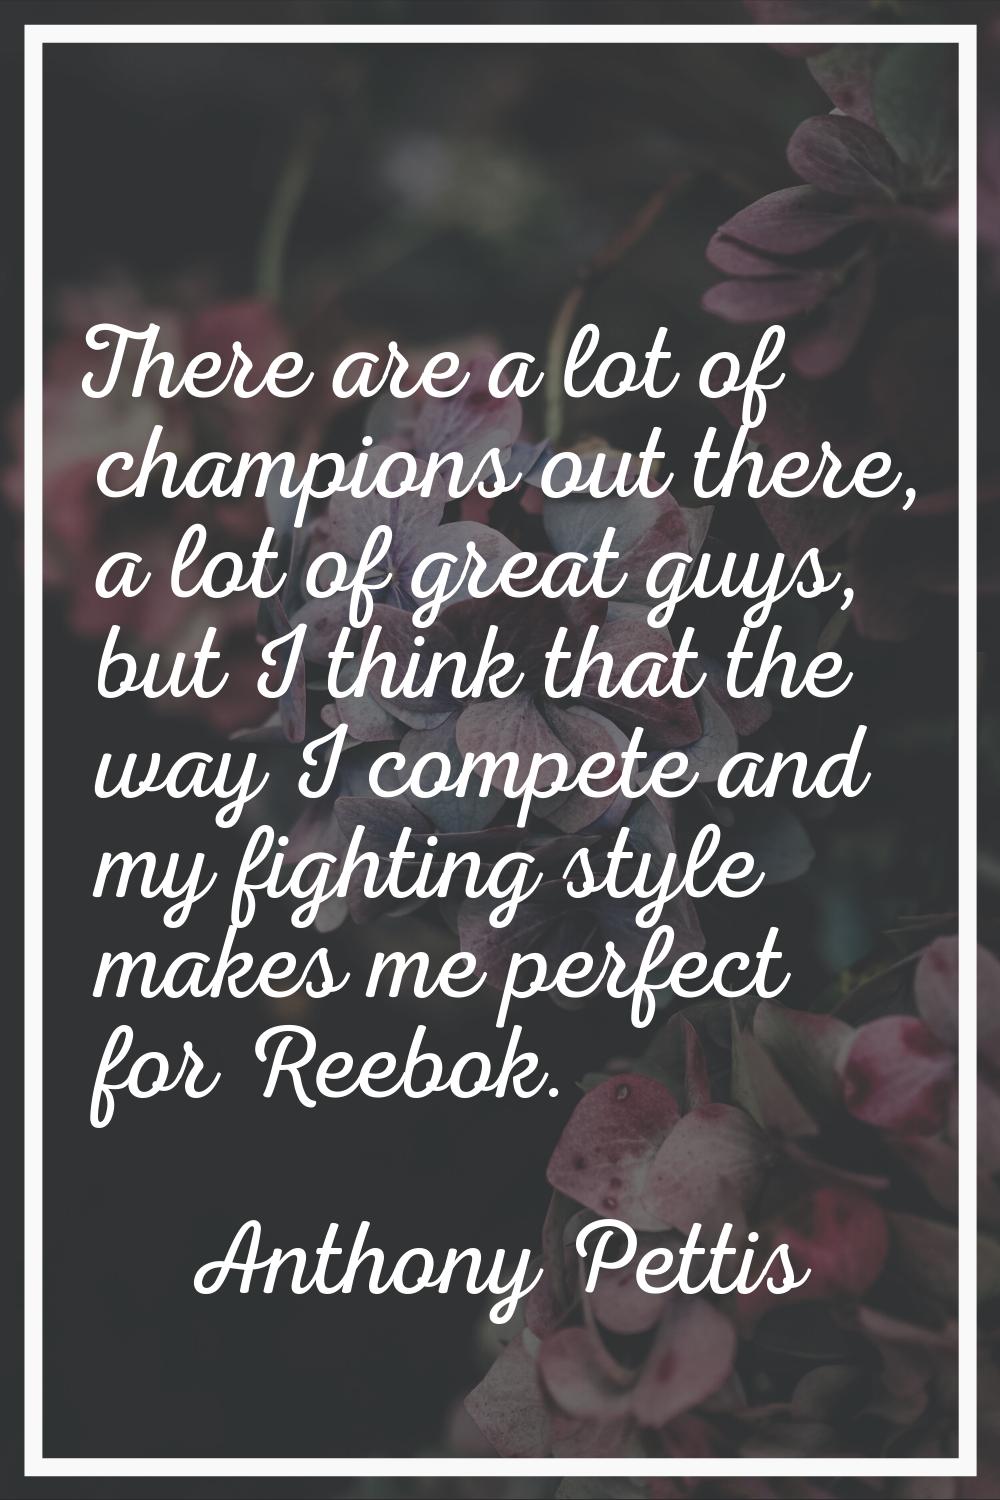 There are a lot of champions out there, a lot of great guys, but I think that the way I compete and